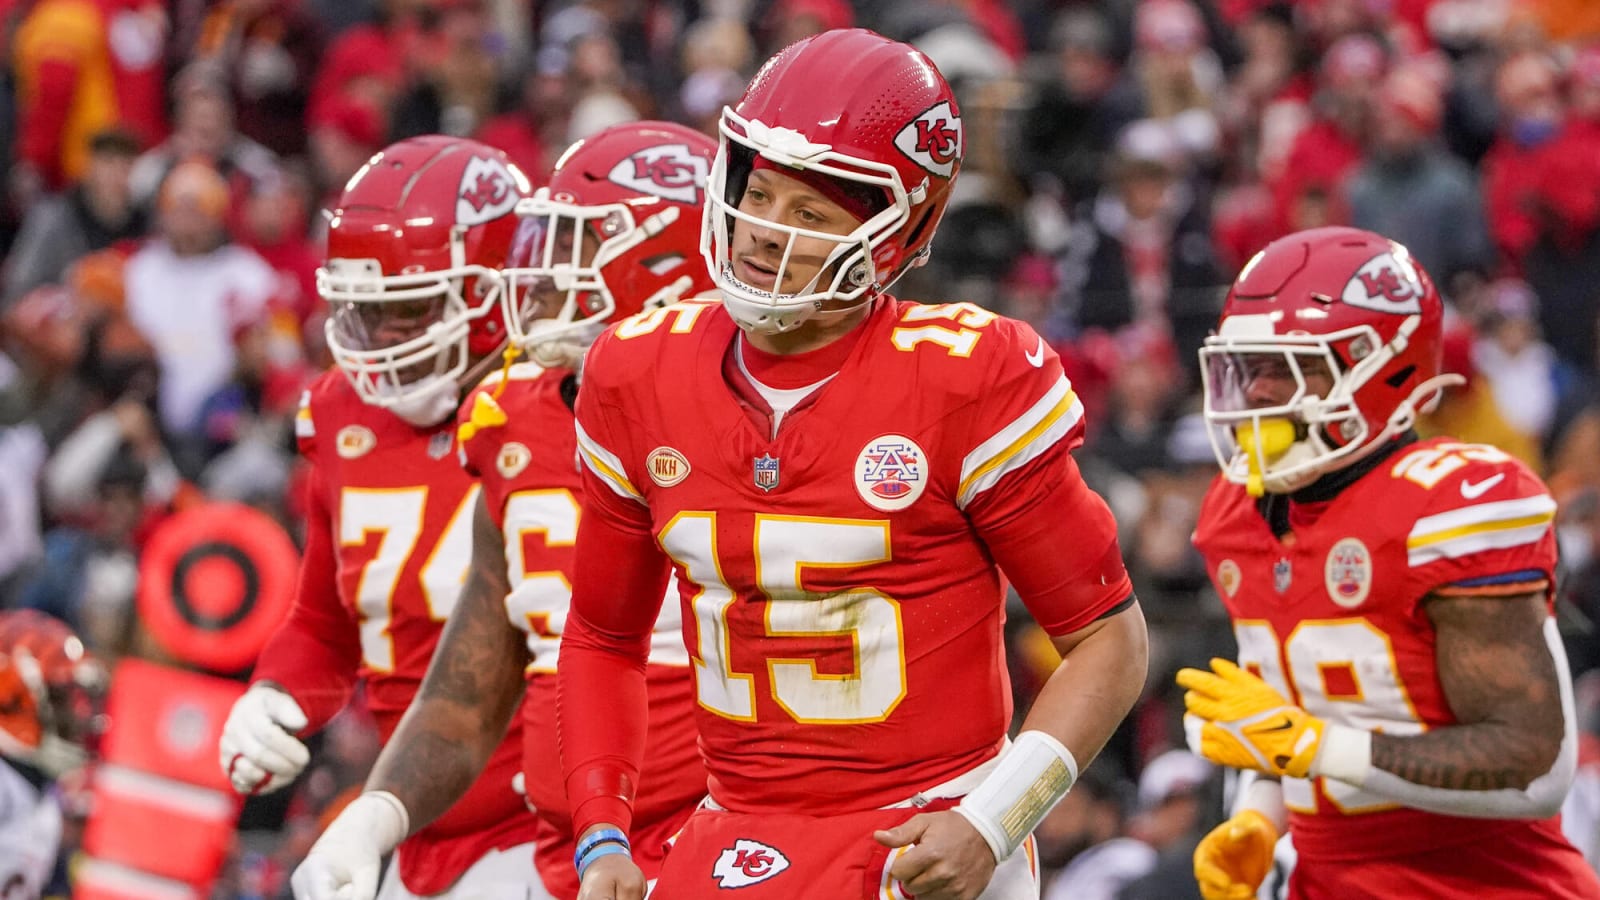 NFL Super Wild Card Weekend: Kansas City Chiefs vs. Miami Dolphins betting picks, preview